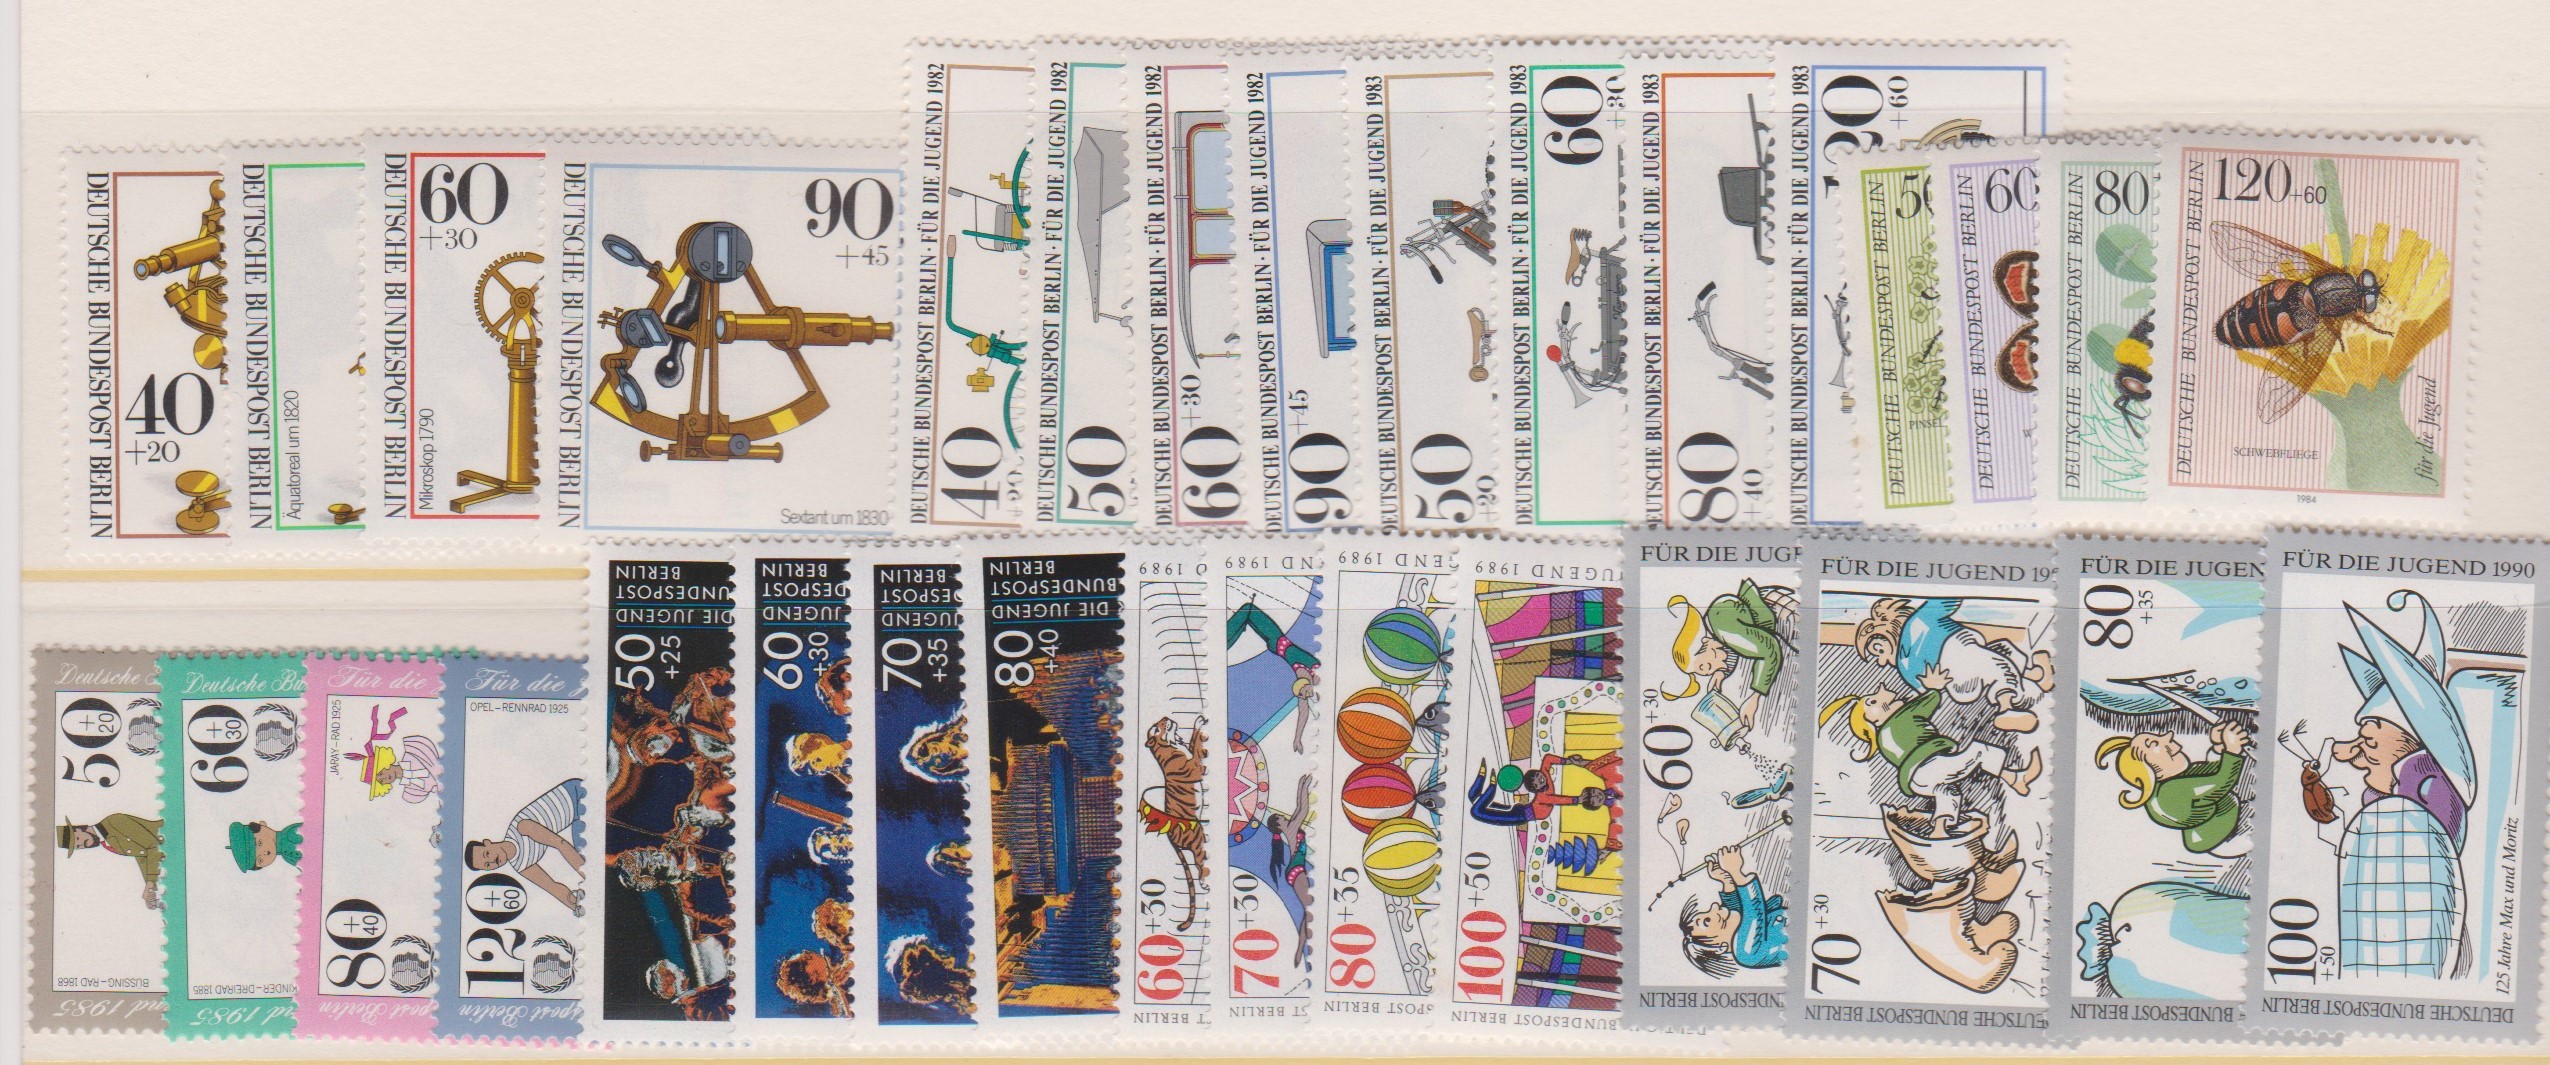 Germany West Berlin 1981-90 Youth Welfare u/m mint sets including 1981 Optical Instruments, 1982